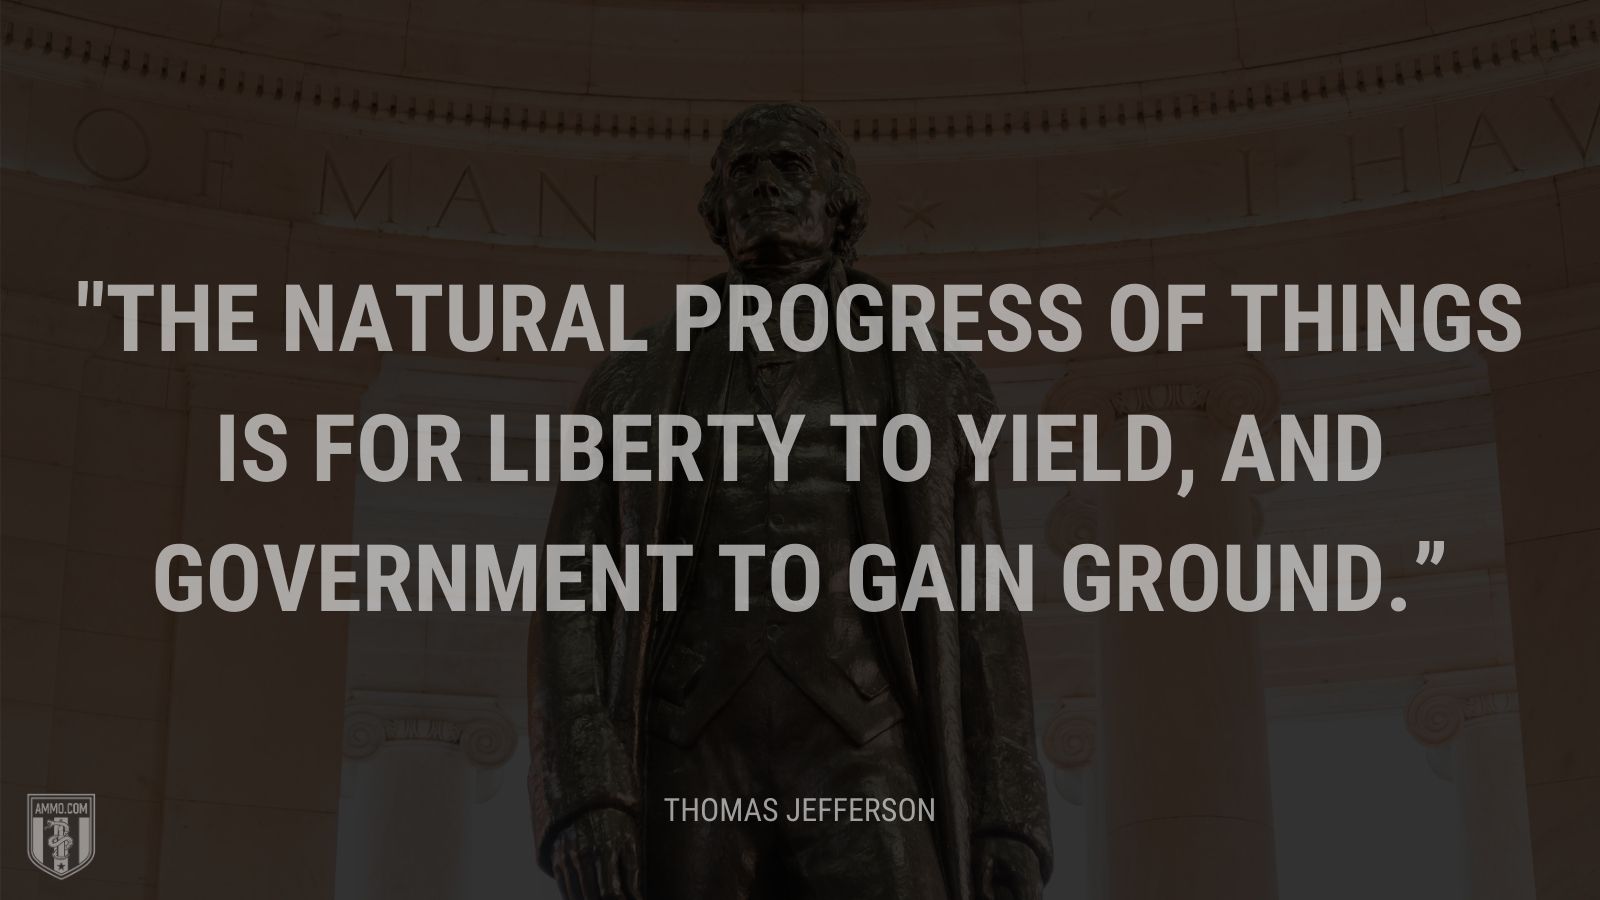 “The natural progress of things is for liberty to yield, and government to gain ground.” - Thomas Jefferson